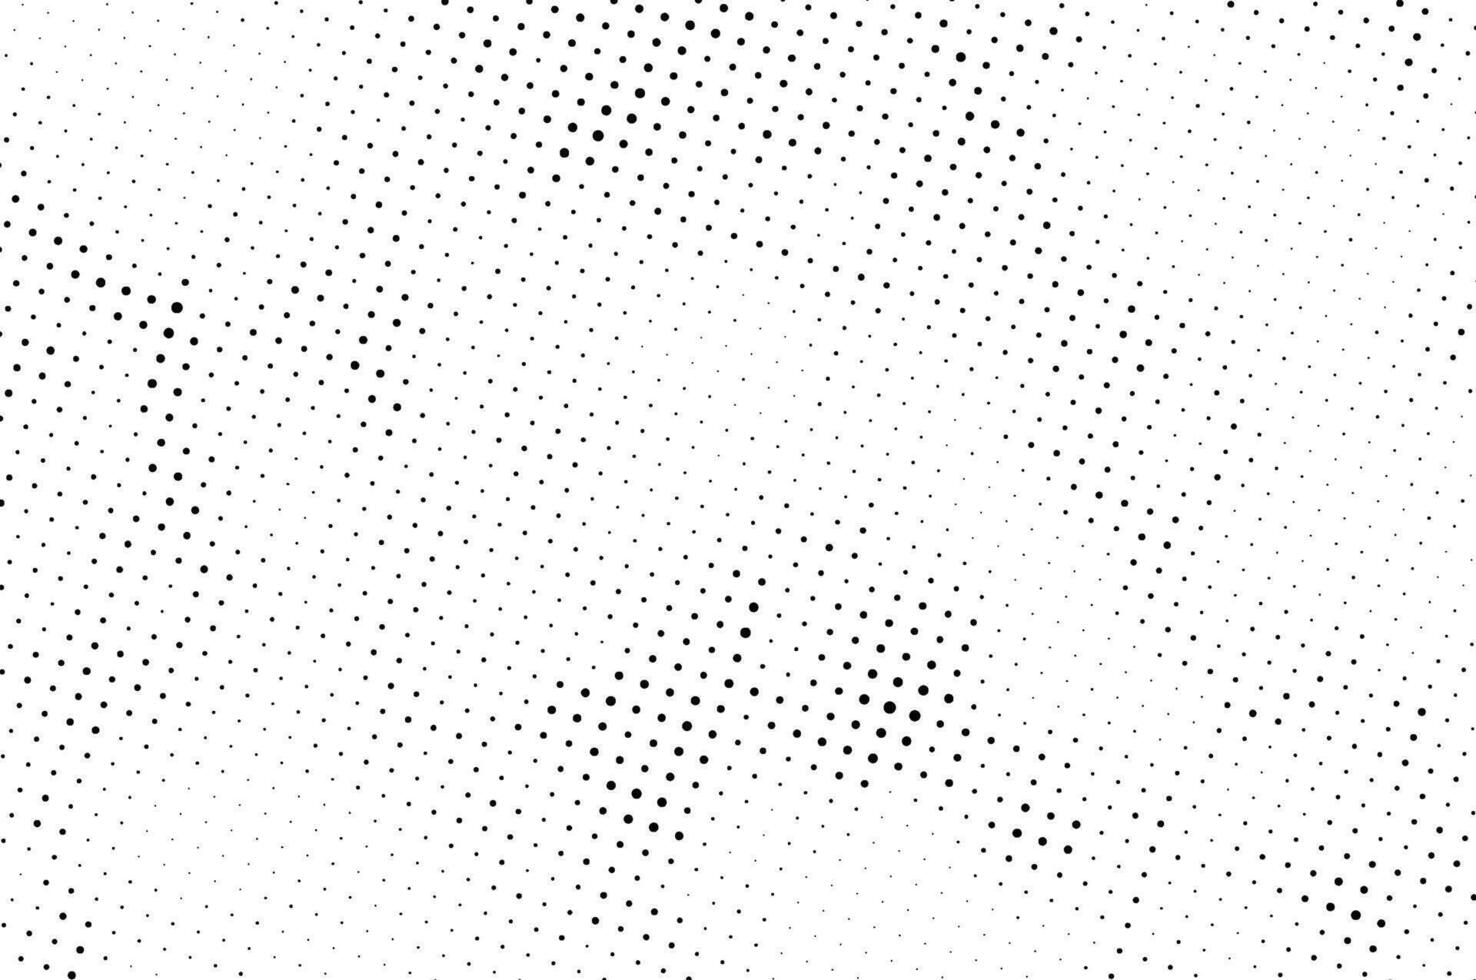 a black and white halftone pattern with dots,  grunge dots effect vector